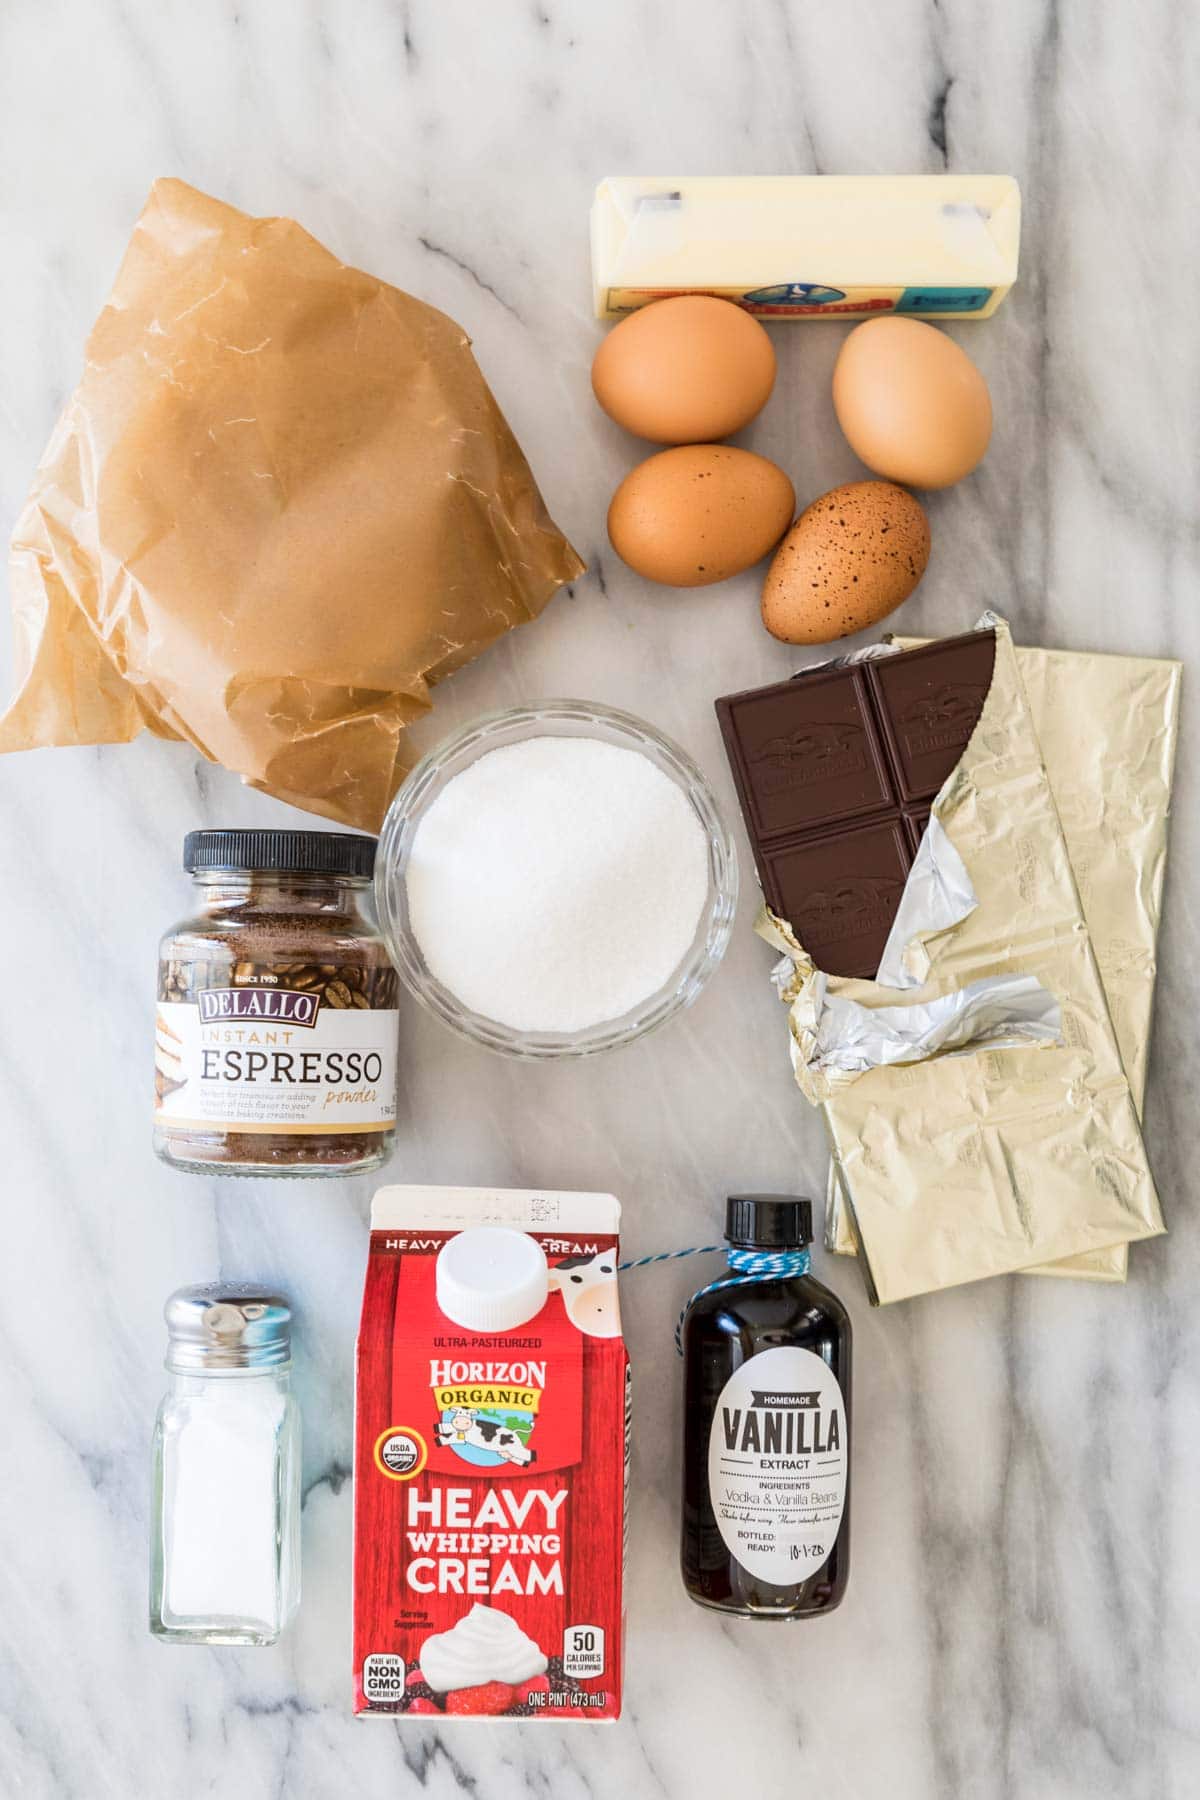 Overhead view of ingredients including pie crust, instant espresso, eggs, chocolate, heavy cream, and more.